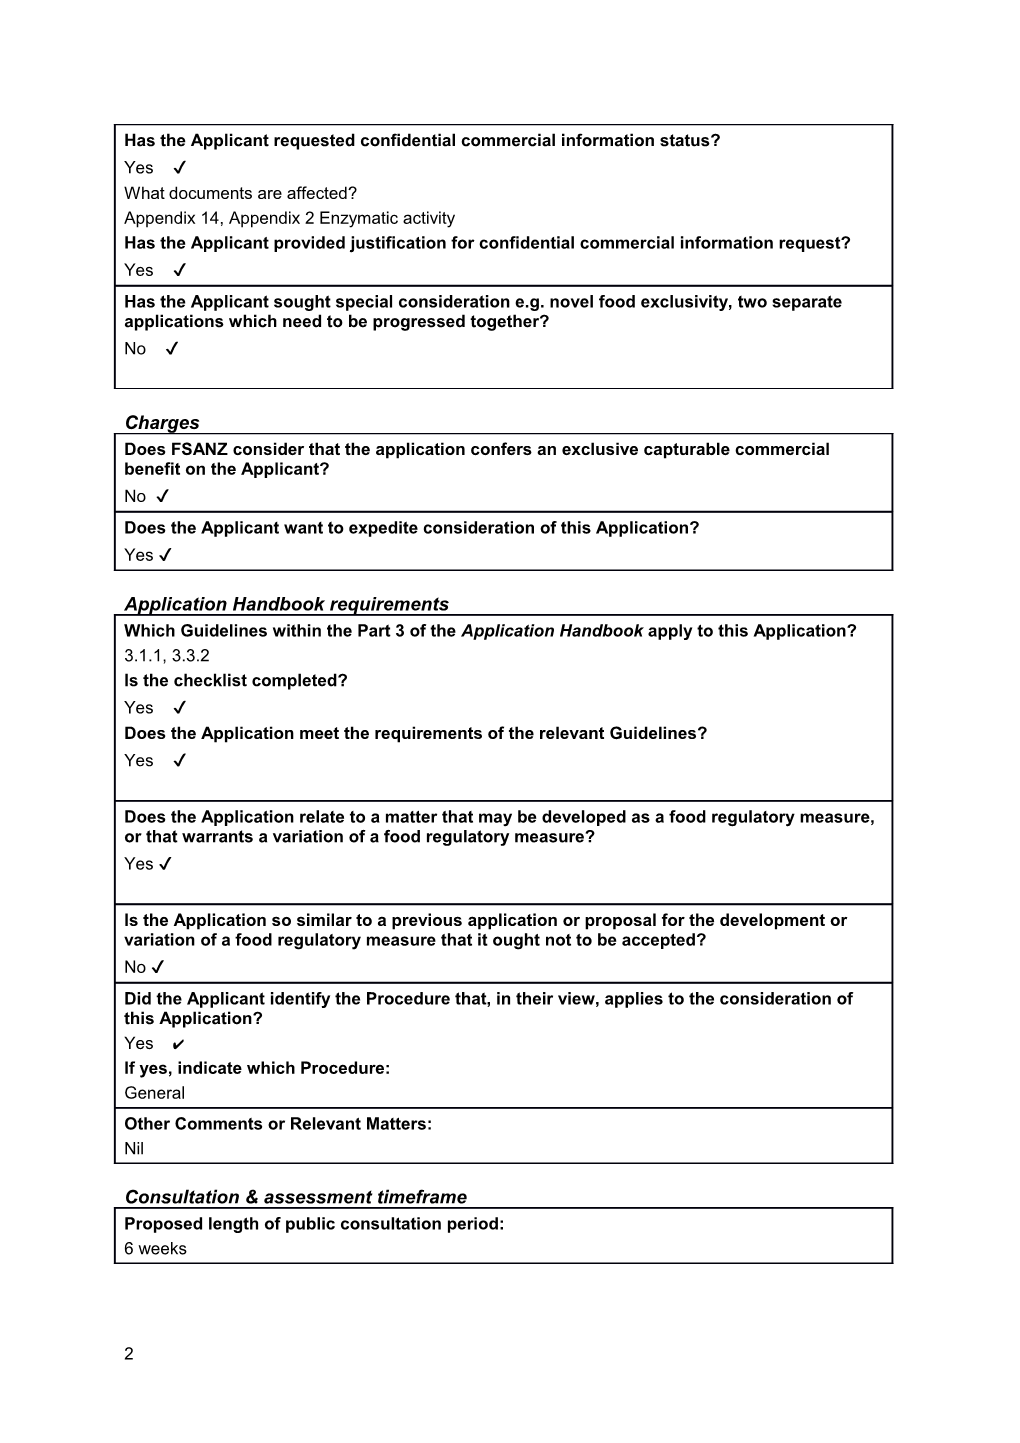 Administrative Assessment Report Application A1153